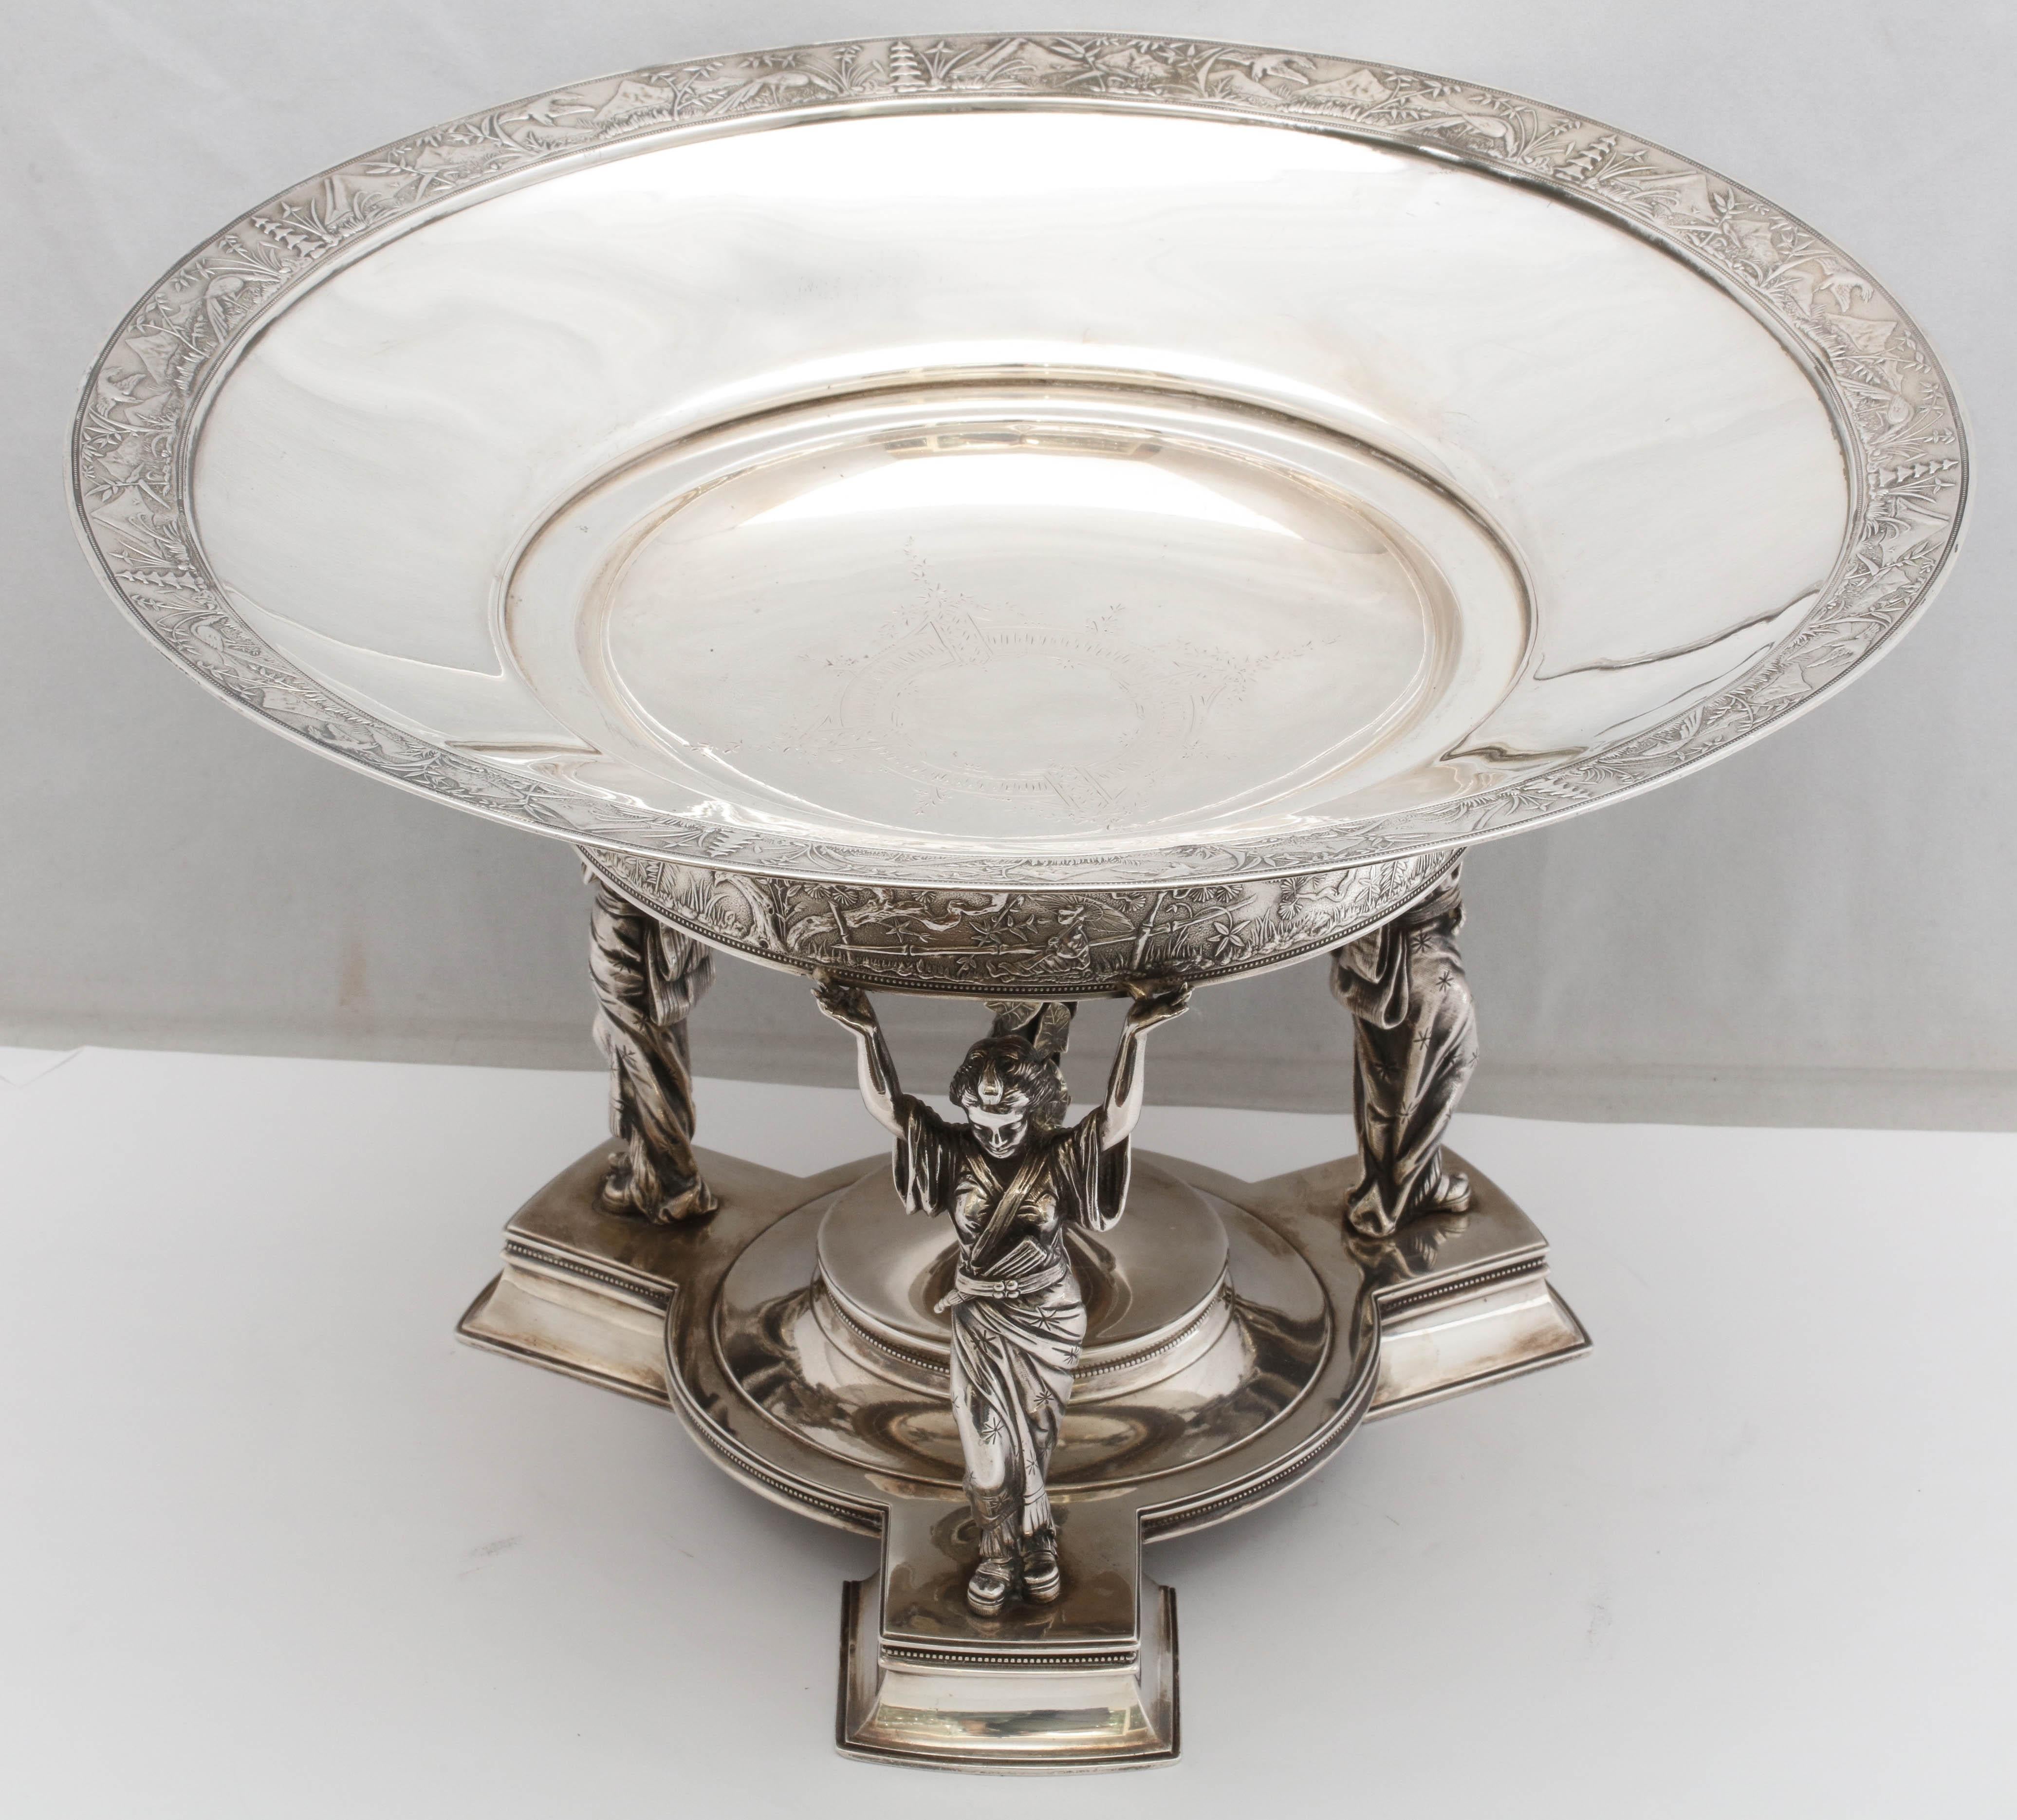 Rare Japonesque Sterling Silver Footed Centerpiece Bowl by Gorham 4